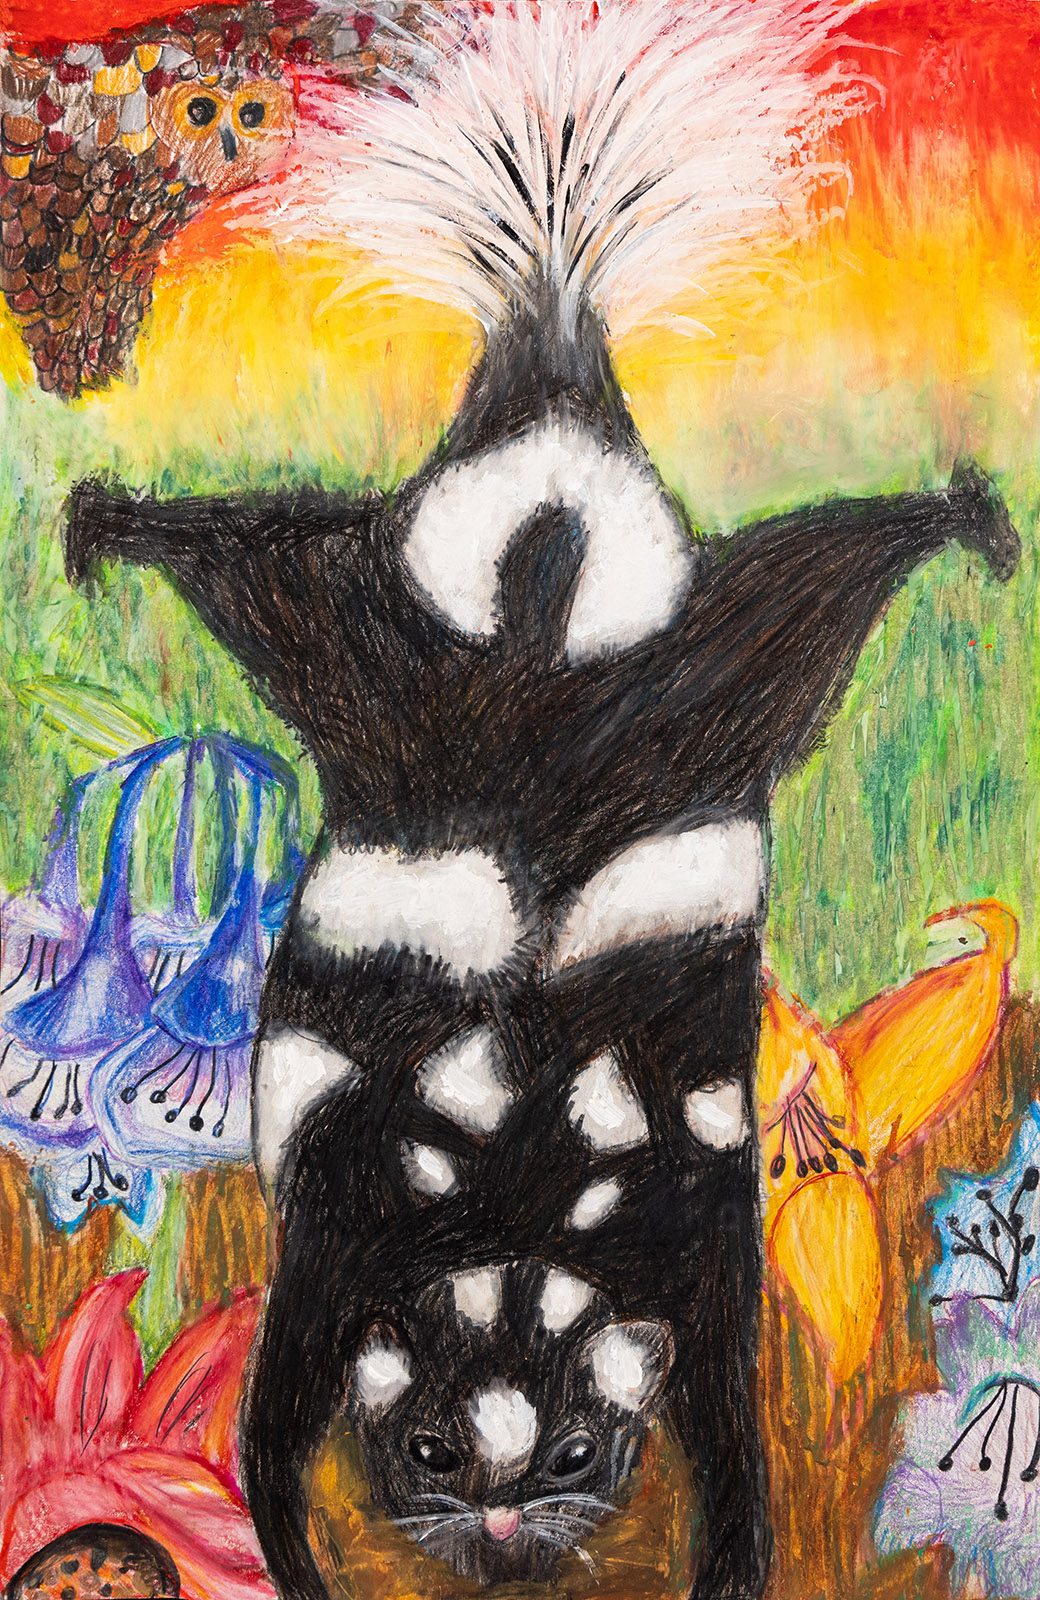 A bright, colorful drawing of a spotted skunk doing a handstand with an owl flying by in one corner and lilies in the bottom corners.